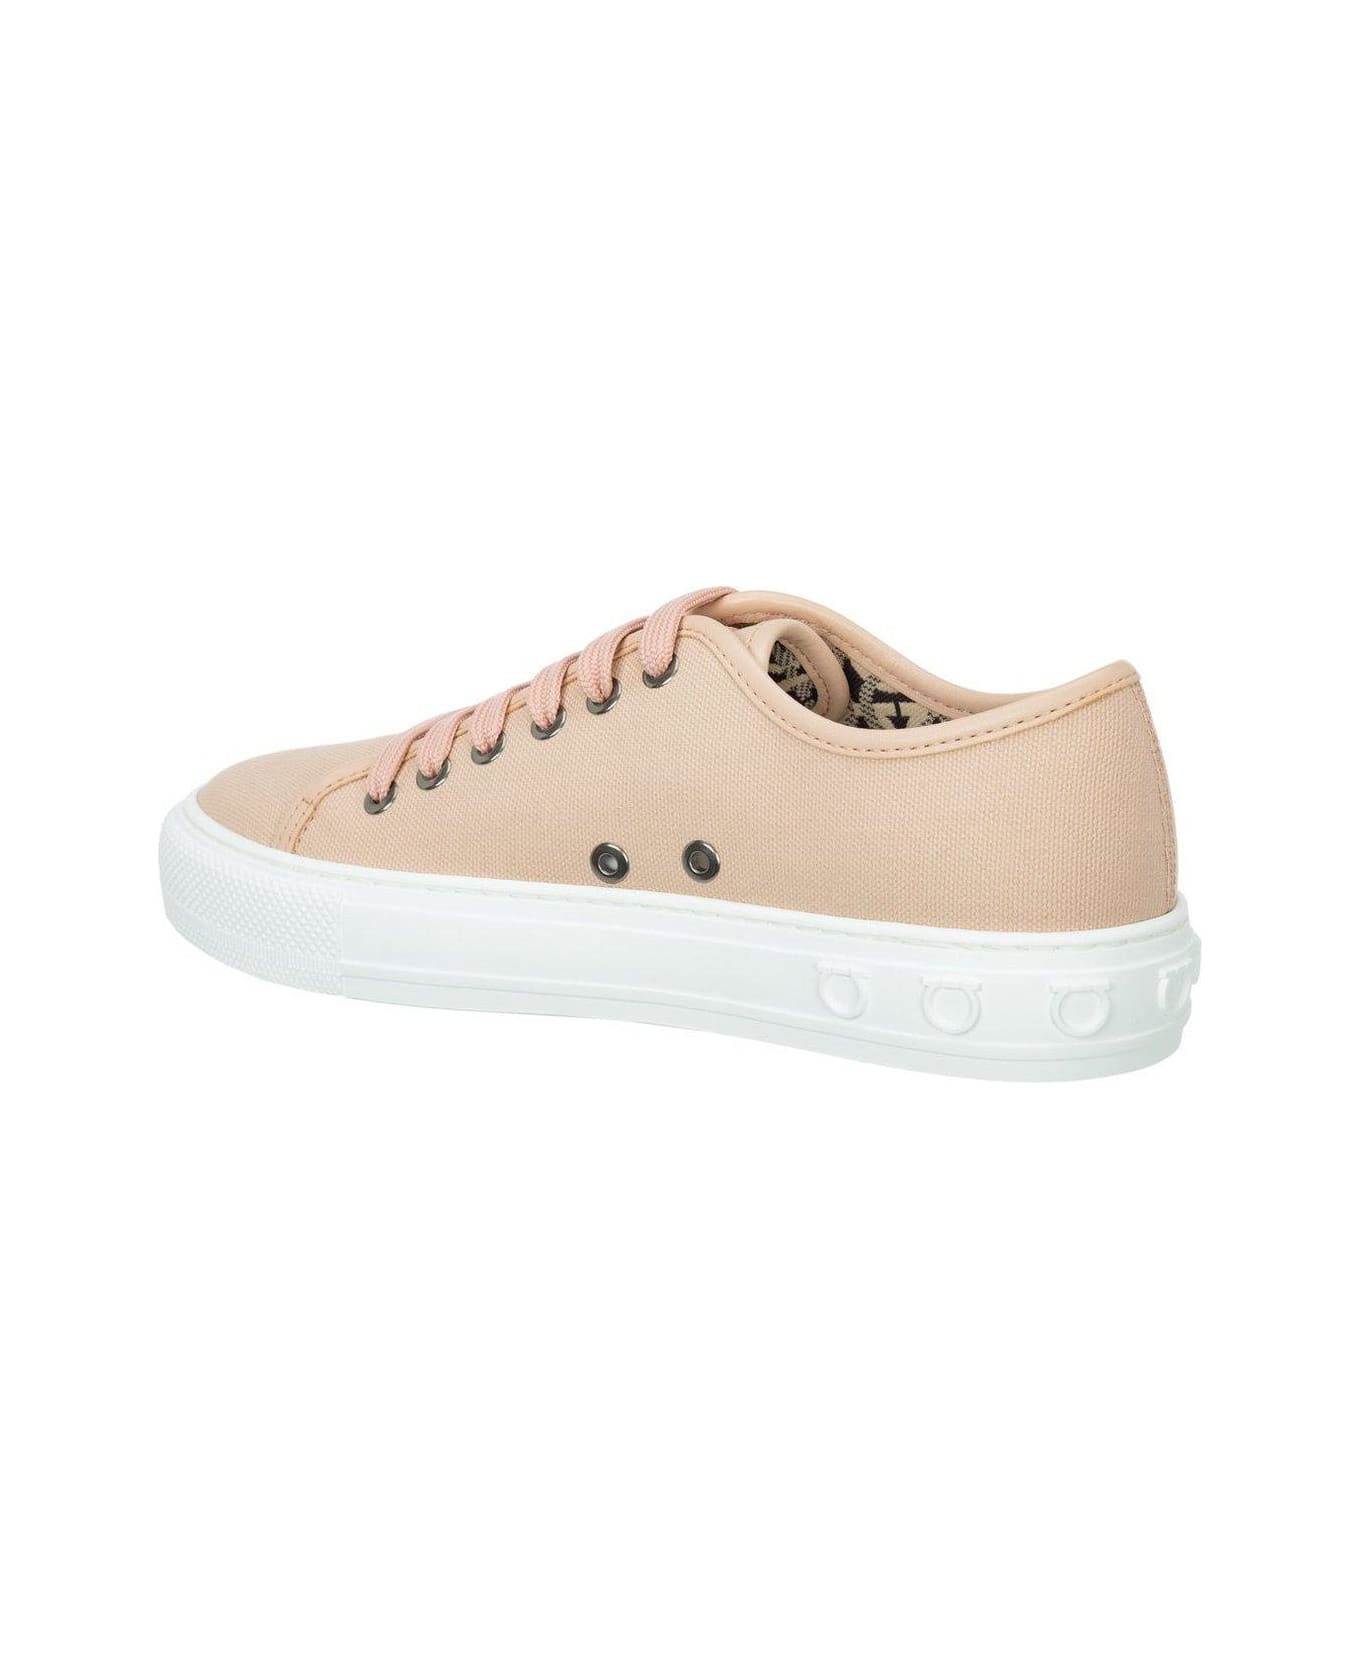 Ferragamo Logo Embossed Lace-up Sneakers - Pink